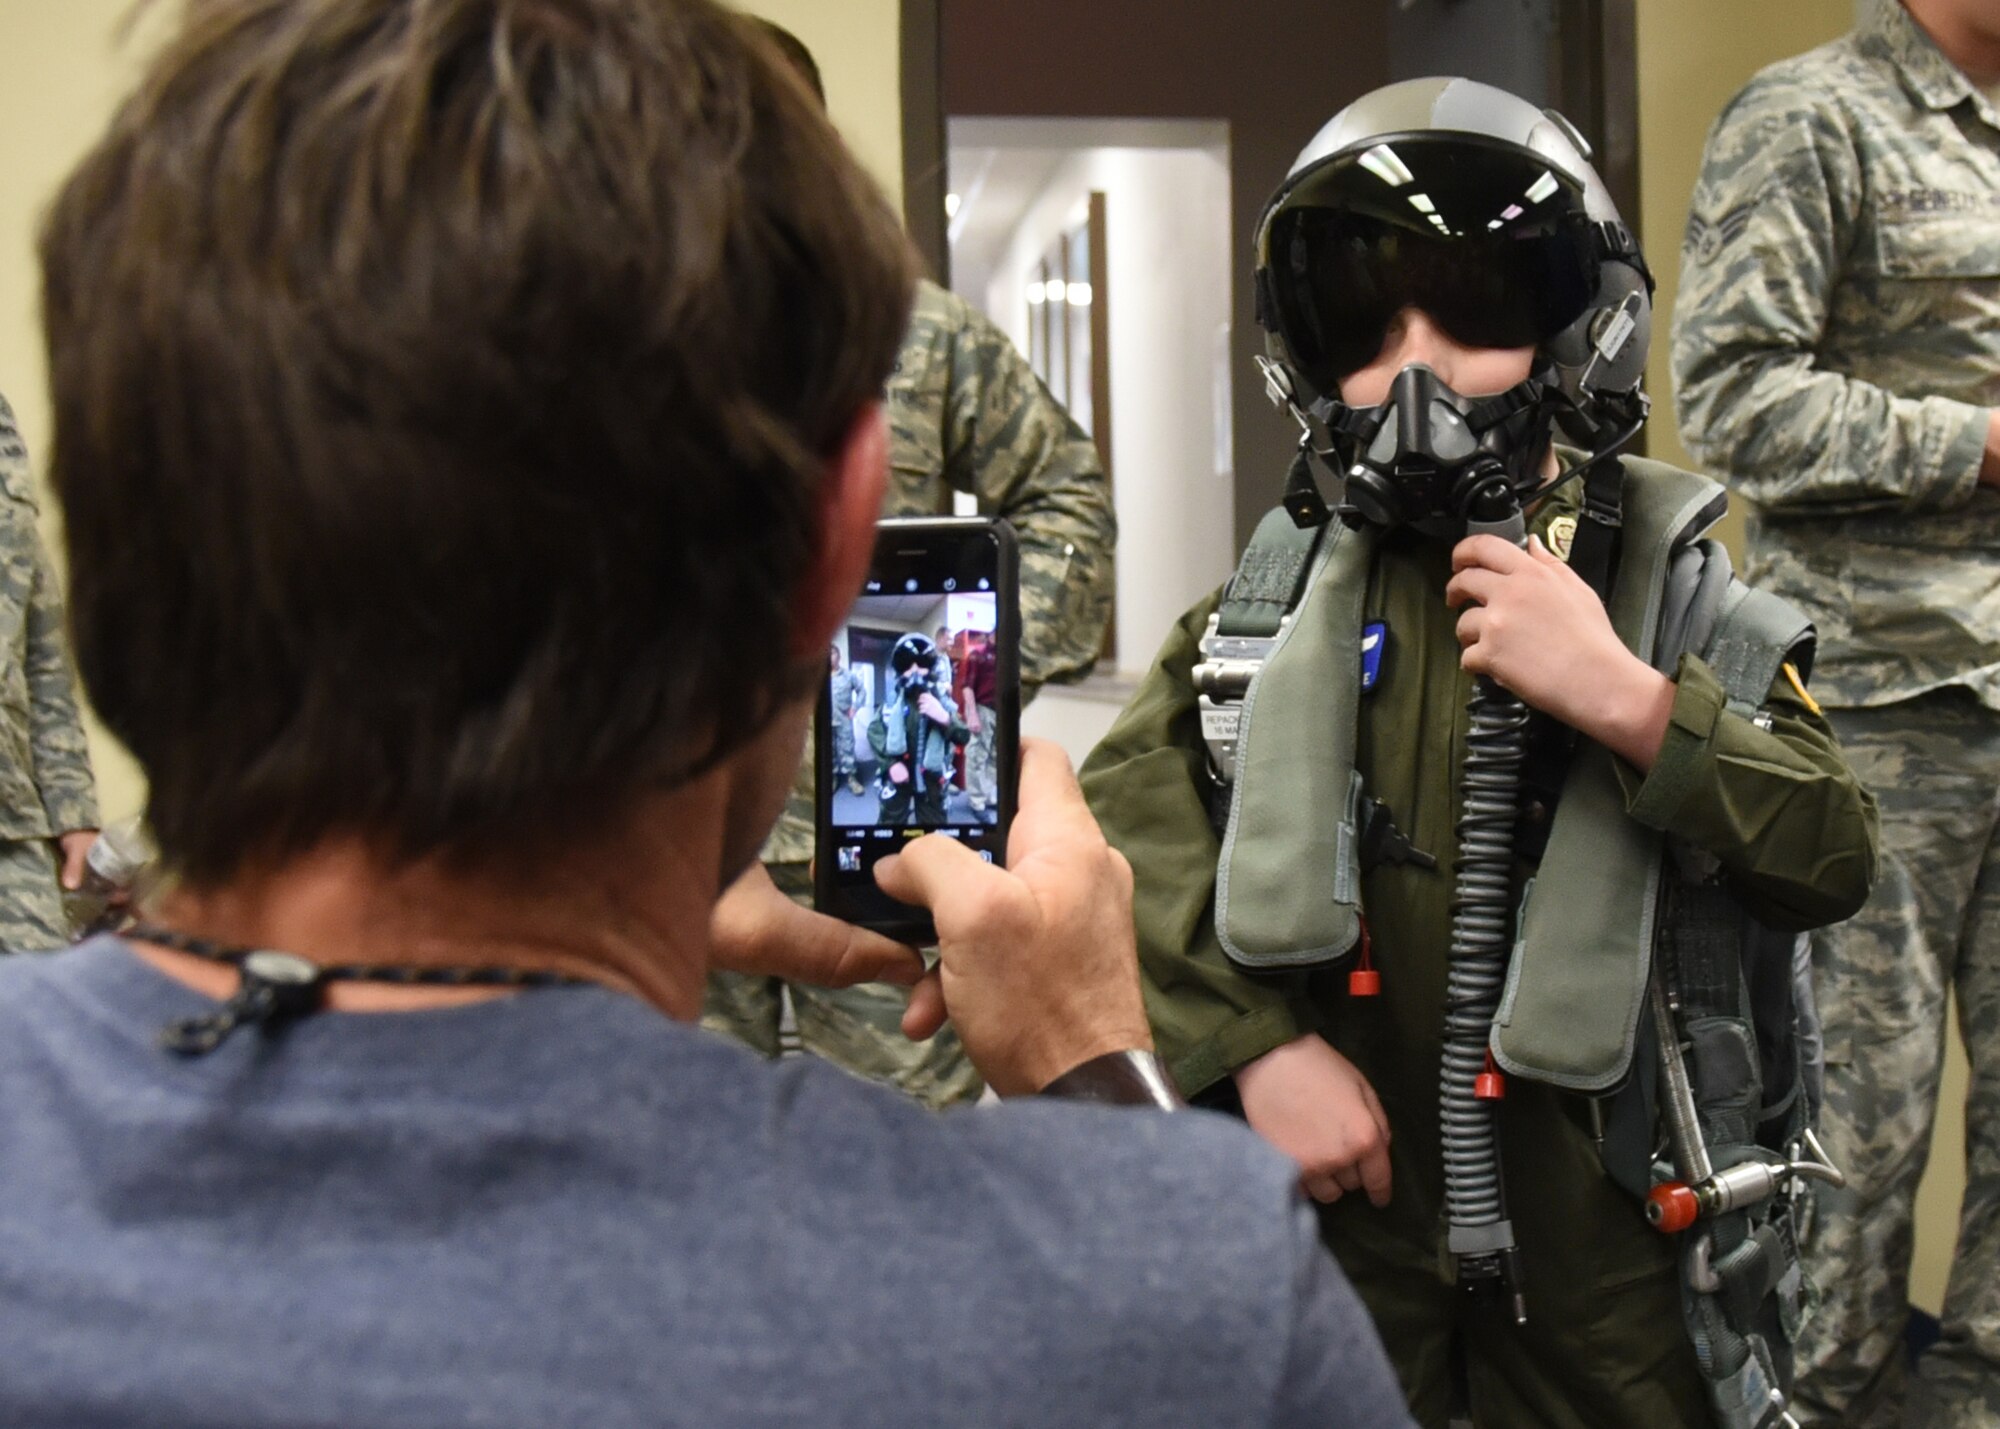 Honorary pilot Caleb Melville has a picture taken by his father, Isaiah Melville, while wearing flight equipment in the 2nd Fighter Training Squadron at Tyndall Air Force Base, Fla., April 21, 2017. Caleb became an honorary pilot through Tyndall’s pilot for a day program with help from the Shaddai Shriners children’s hospital. (U.S. Air Force photo by Airman 1st Class Isaiah J. Soliz/Released)